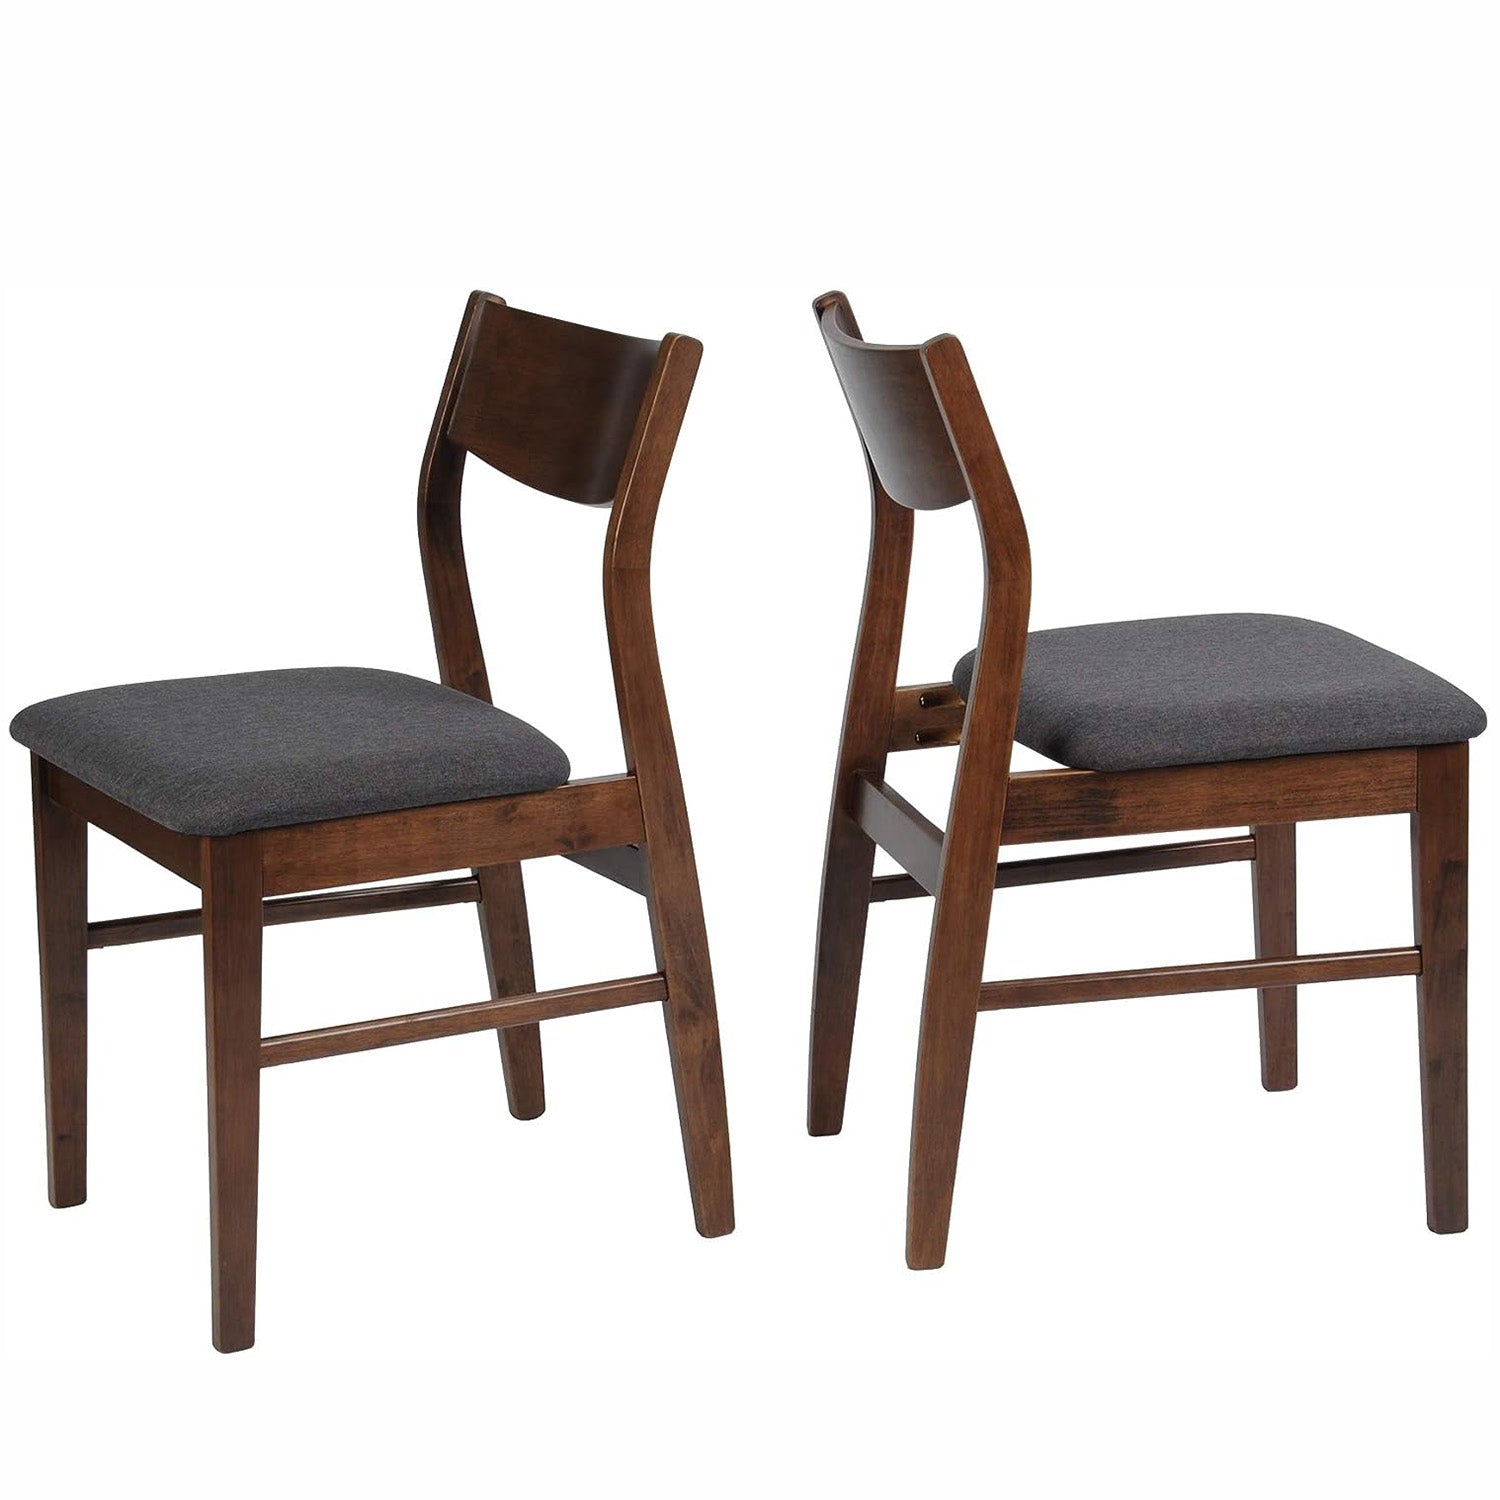 2 Pack Wooden Chairs with Cushioned Seat for Dining Room Set of 2 Upholstered Chairs with Back